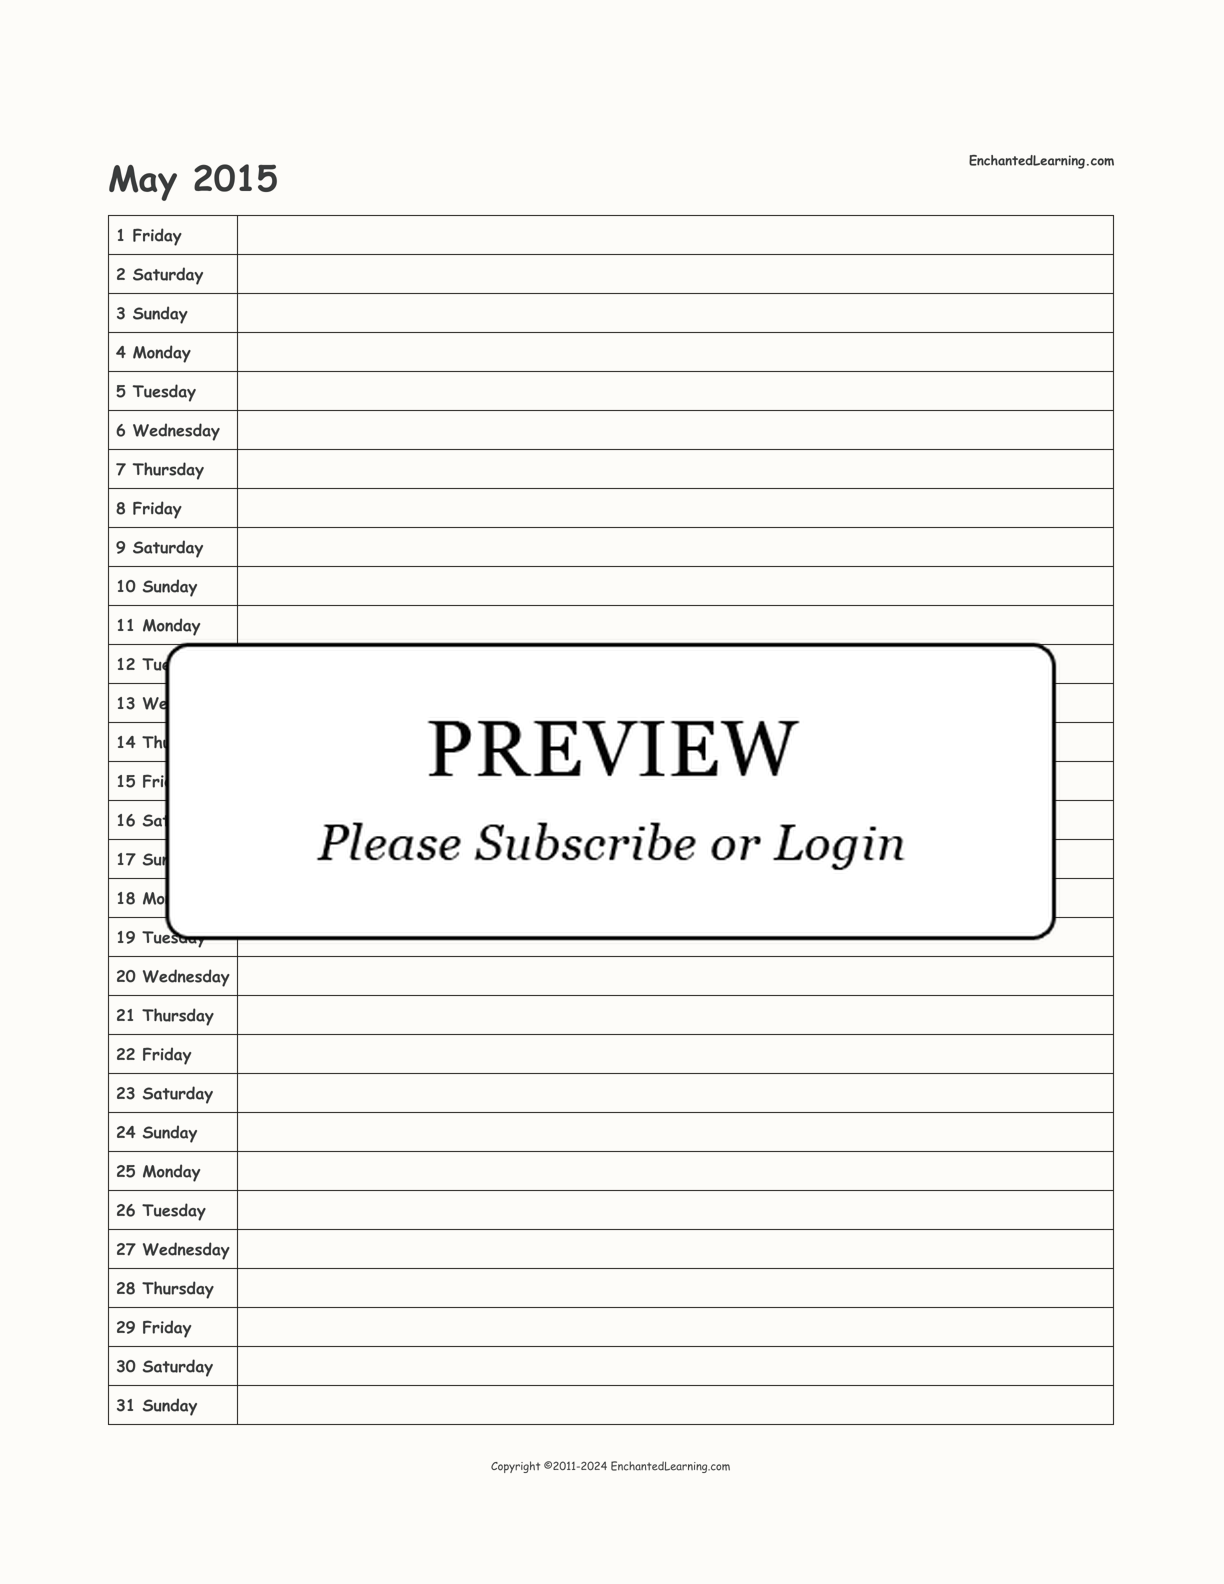 2015 Scheduling Calendar interactive printout page 5